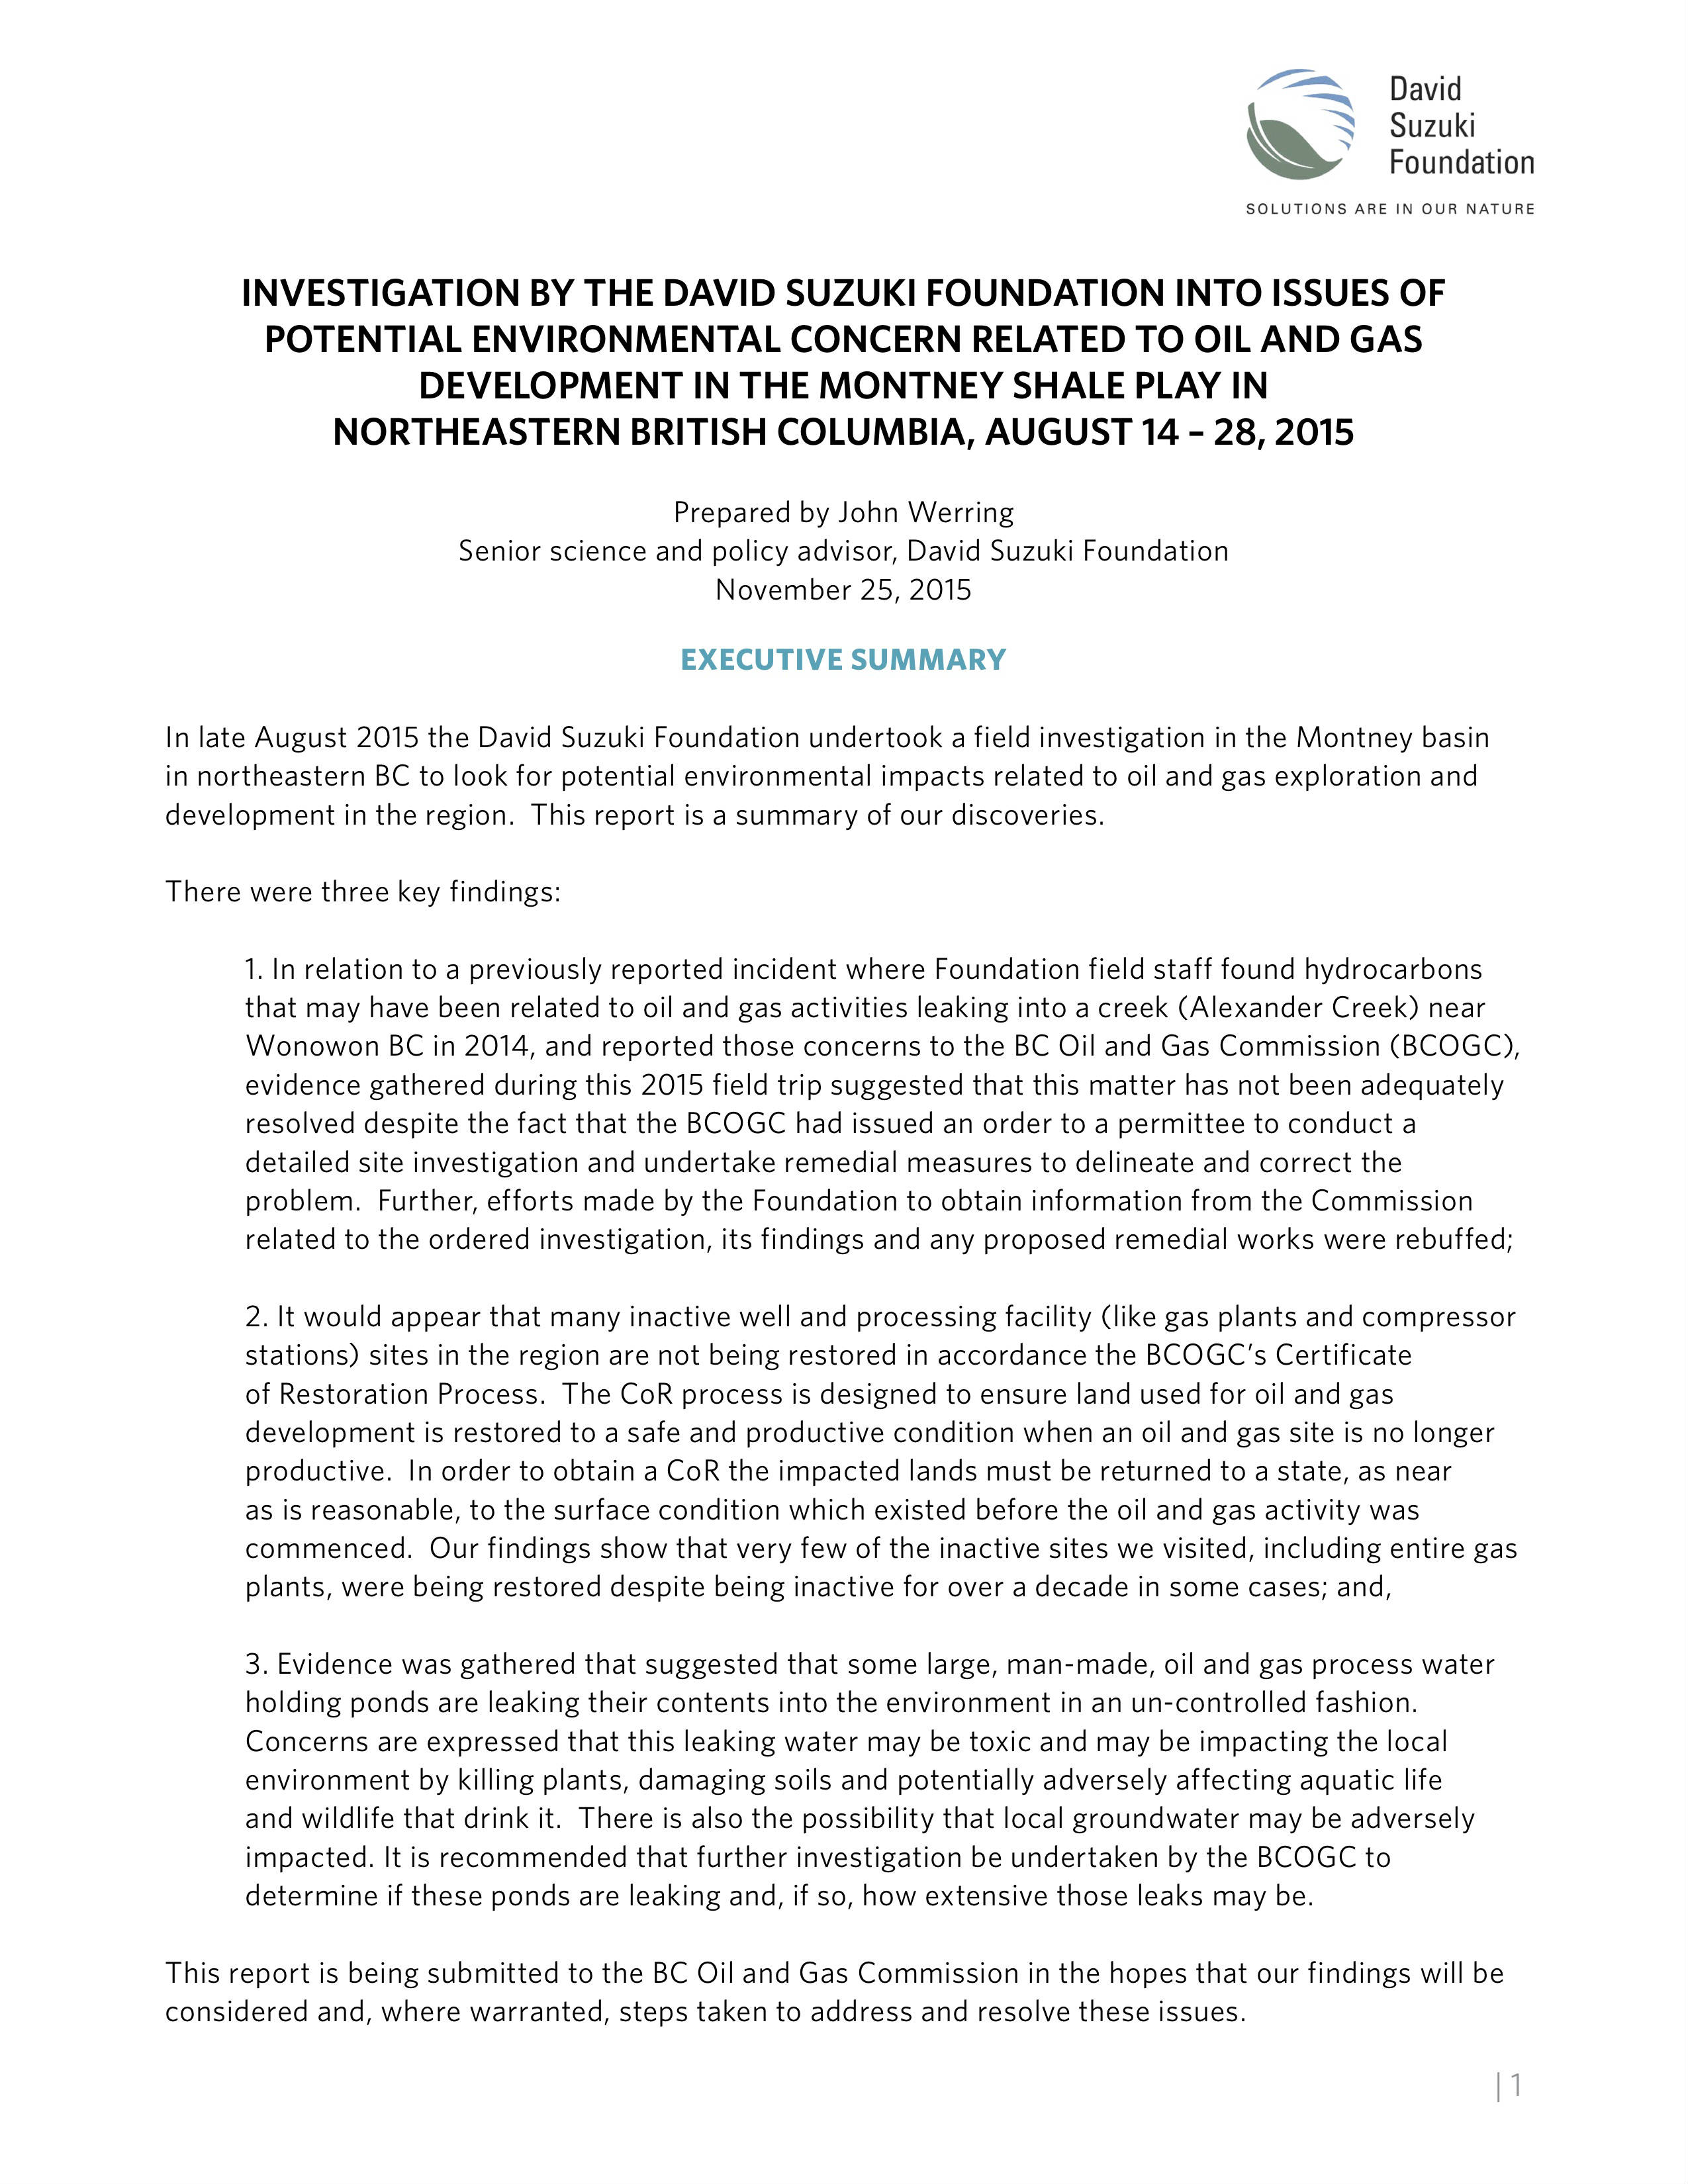 Investigation by the David Suzuki Foundation into Issues of Potential Environmental Concern Related to Oil and Gas Development in the Montney Shale Play in Northeastern British Columbia, August 14 – 28, 2015 cover